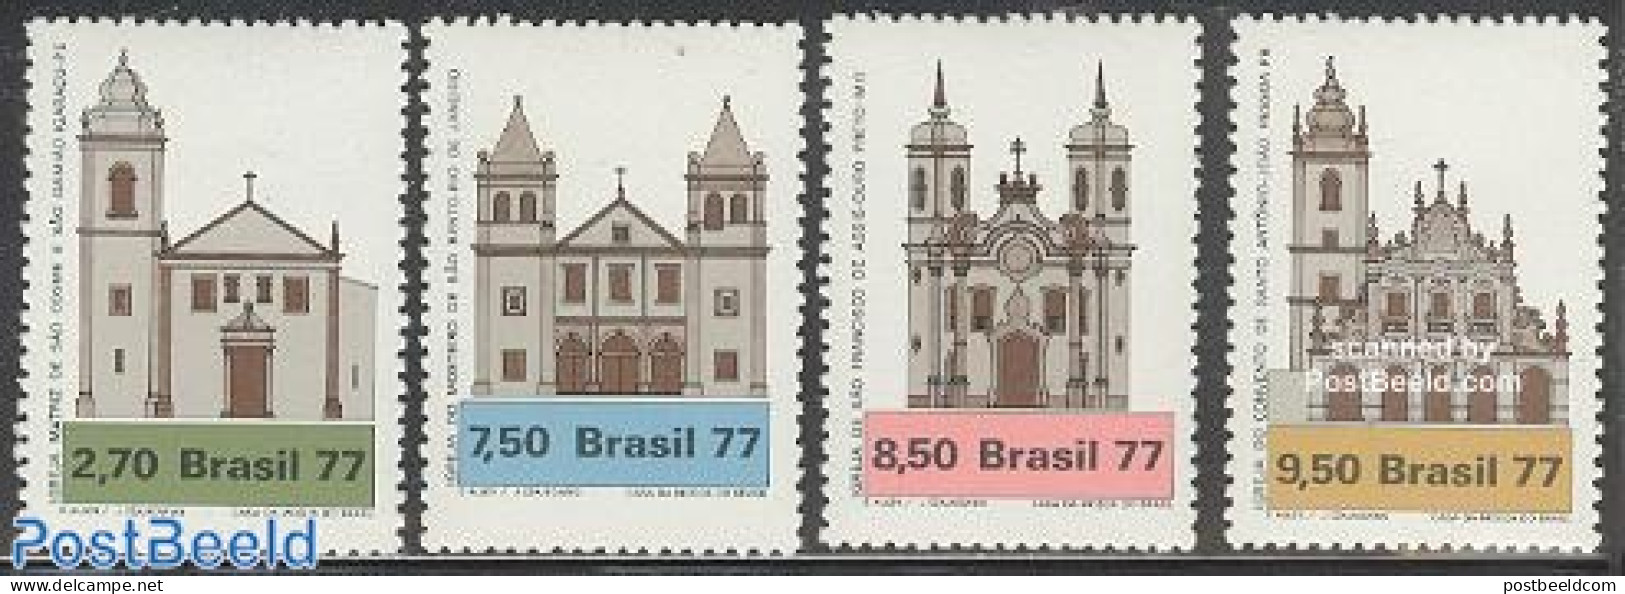 Brazil 1977 Churches 4v, Mint NH, Religion - Churches, Temples, Mosques, Synagogues - Nuovi